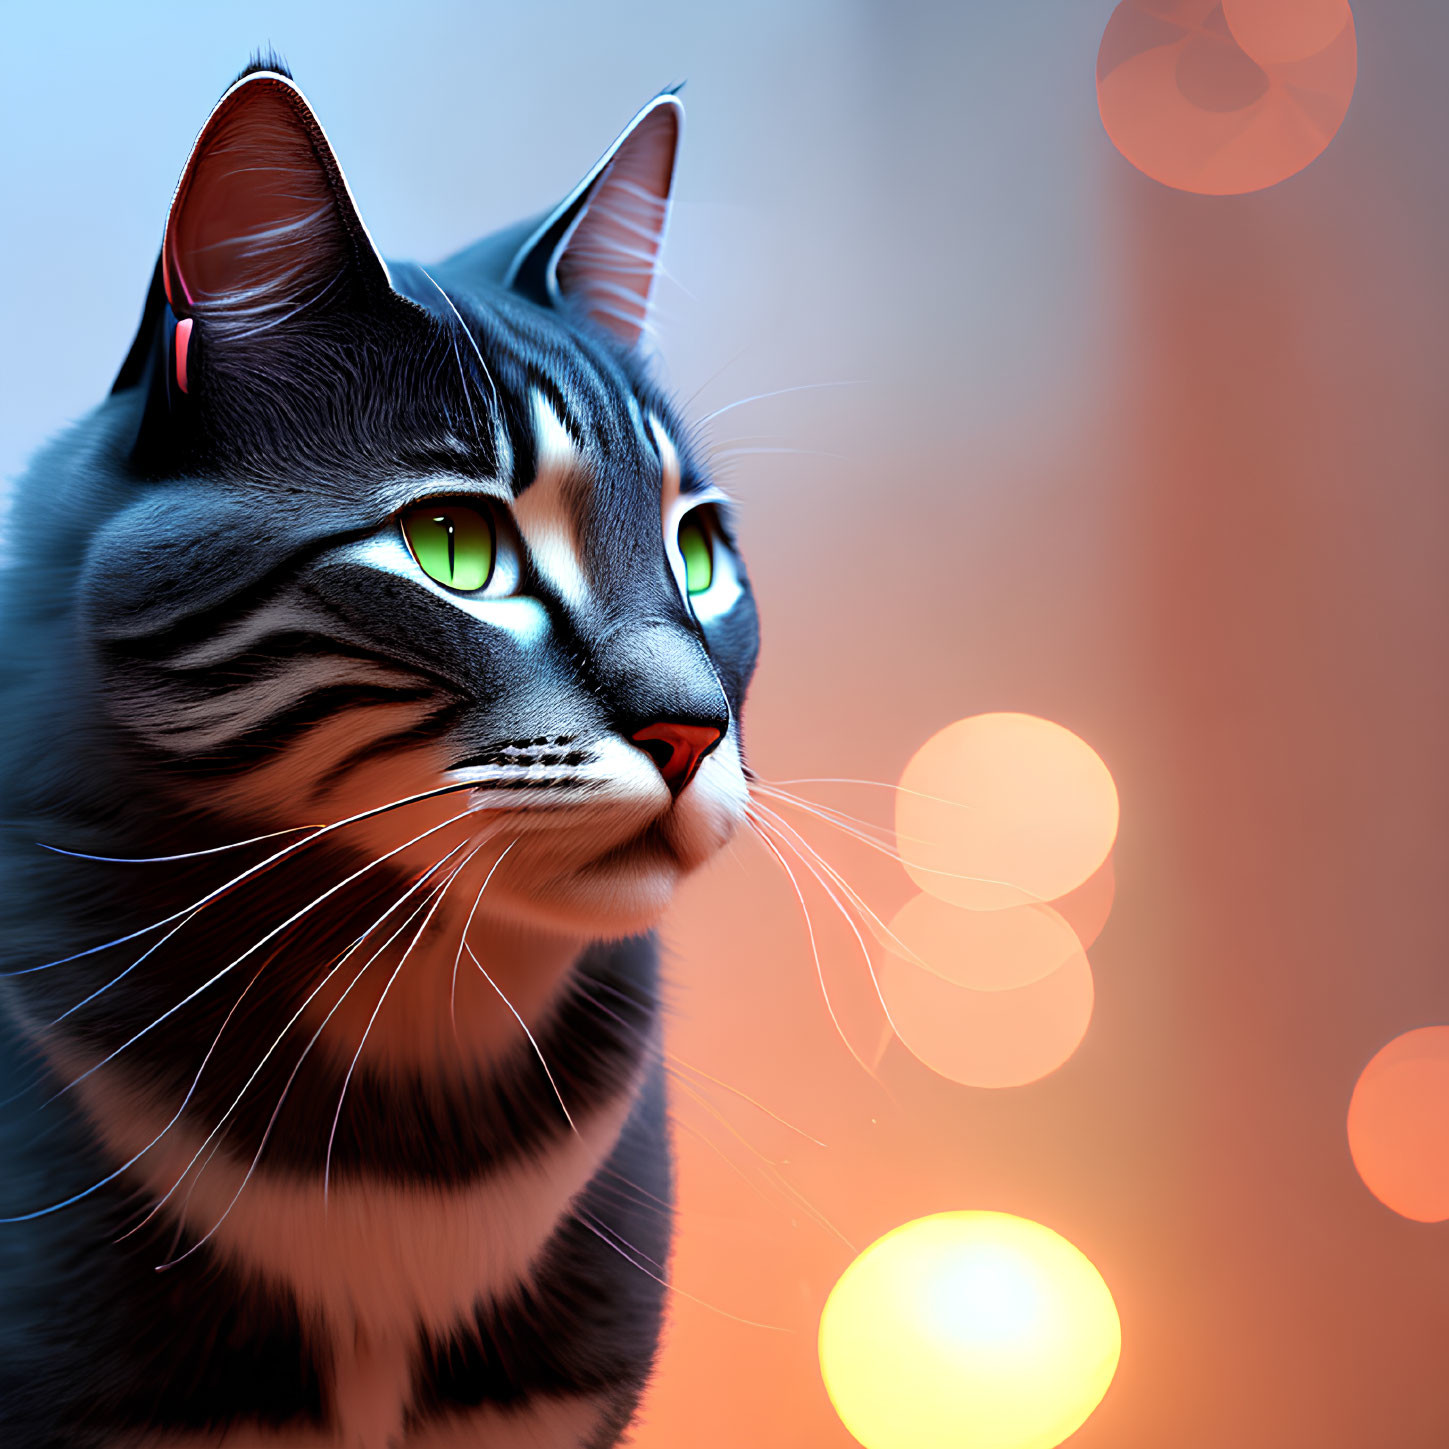 Striking Green-Eyed Cat Digital Illustration with Prominent Whiskers